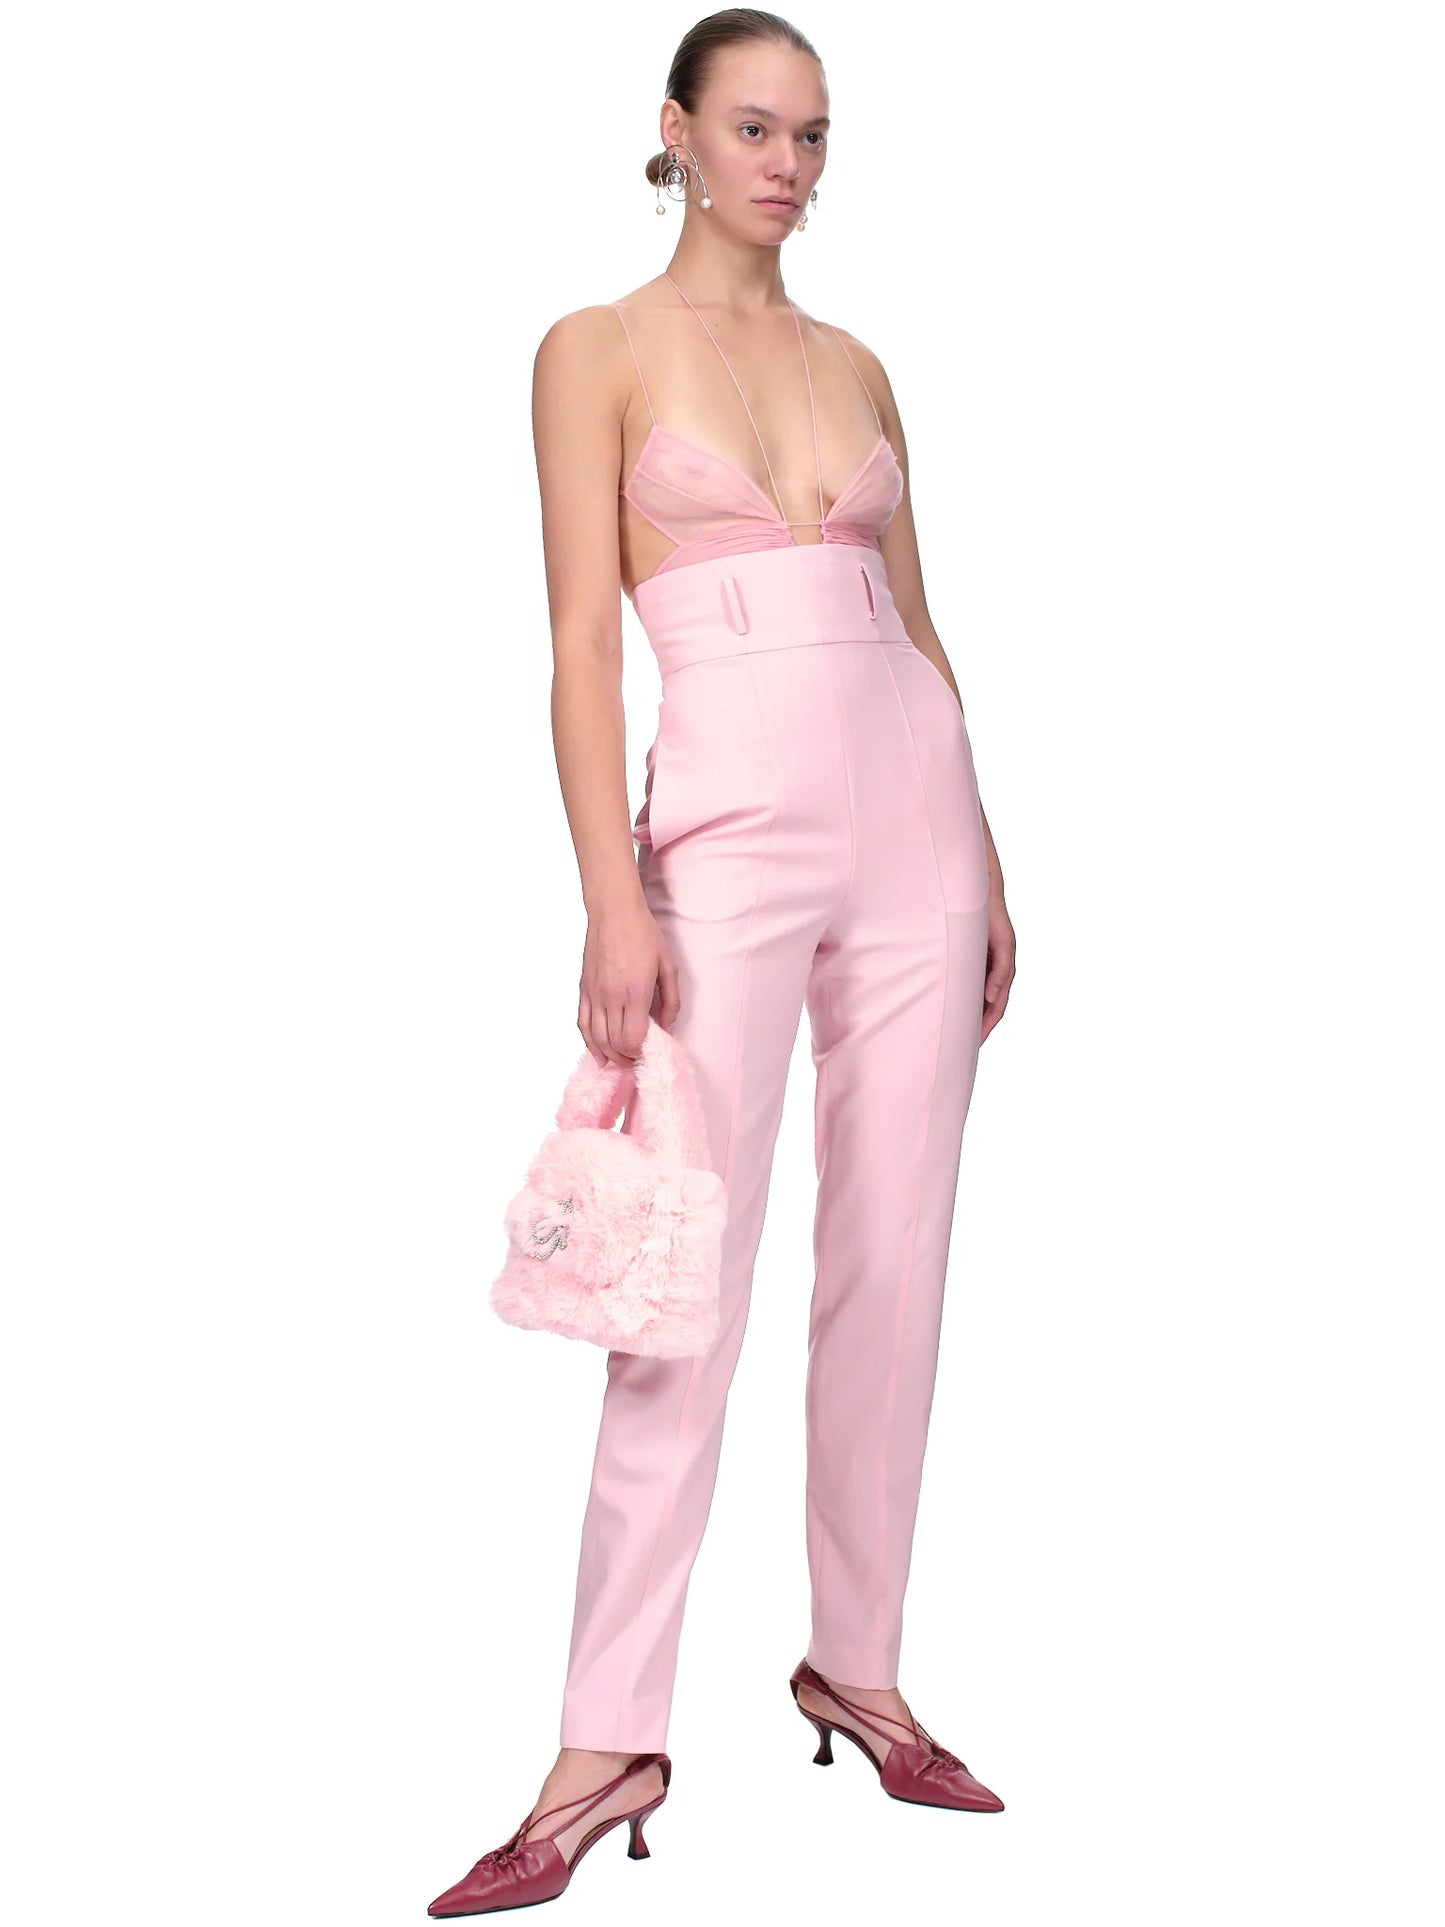 Load image into Gallery viewer, Nensi Dojaka Tailored High Waist Pink Trousers
